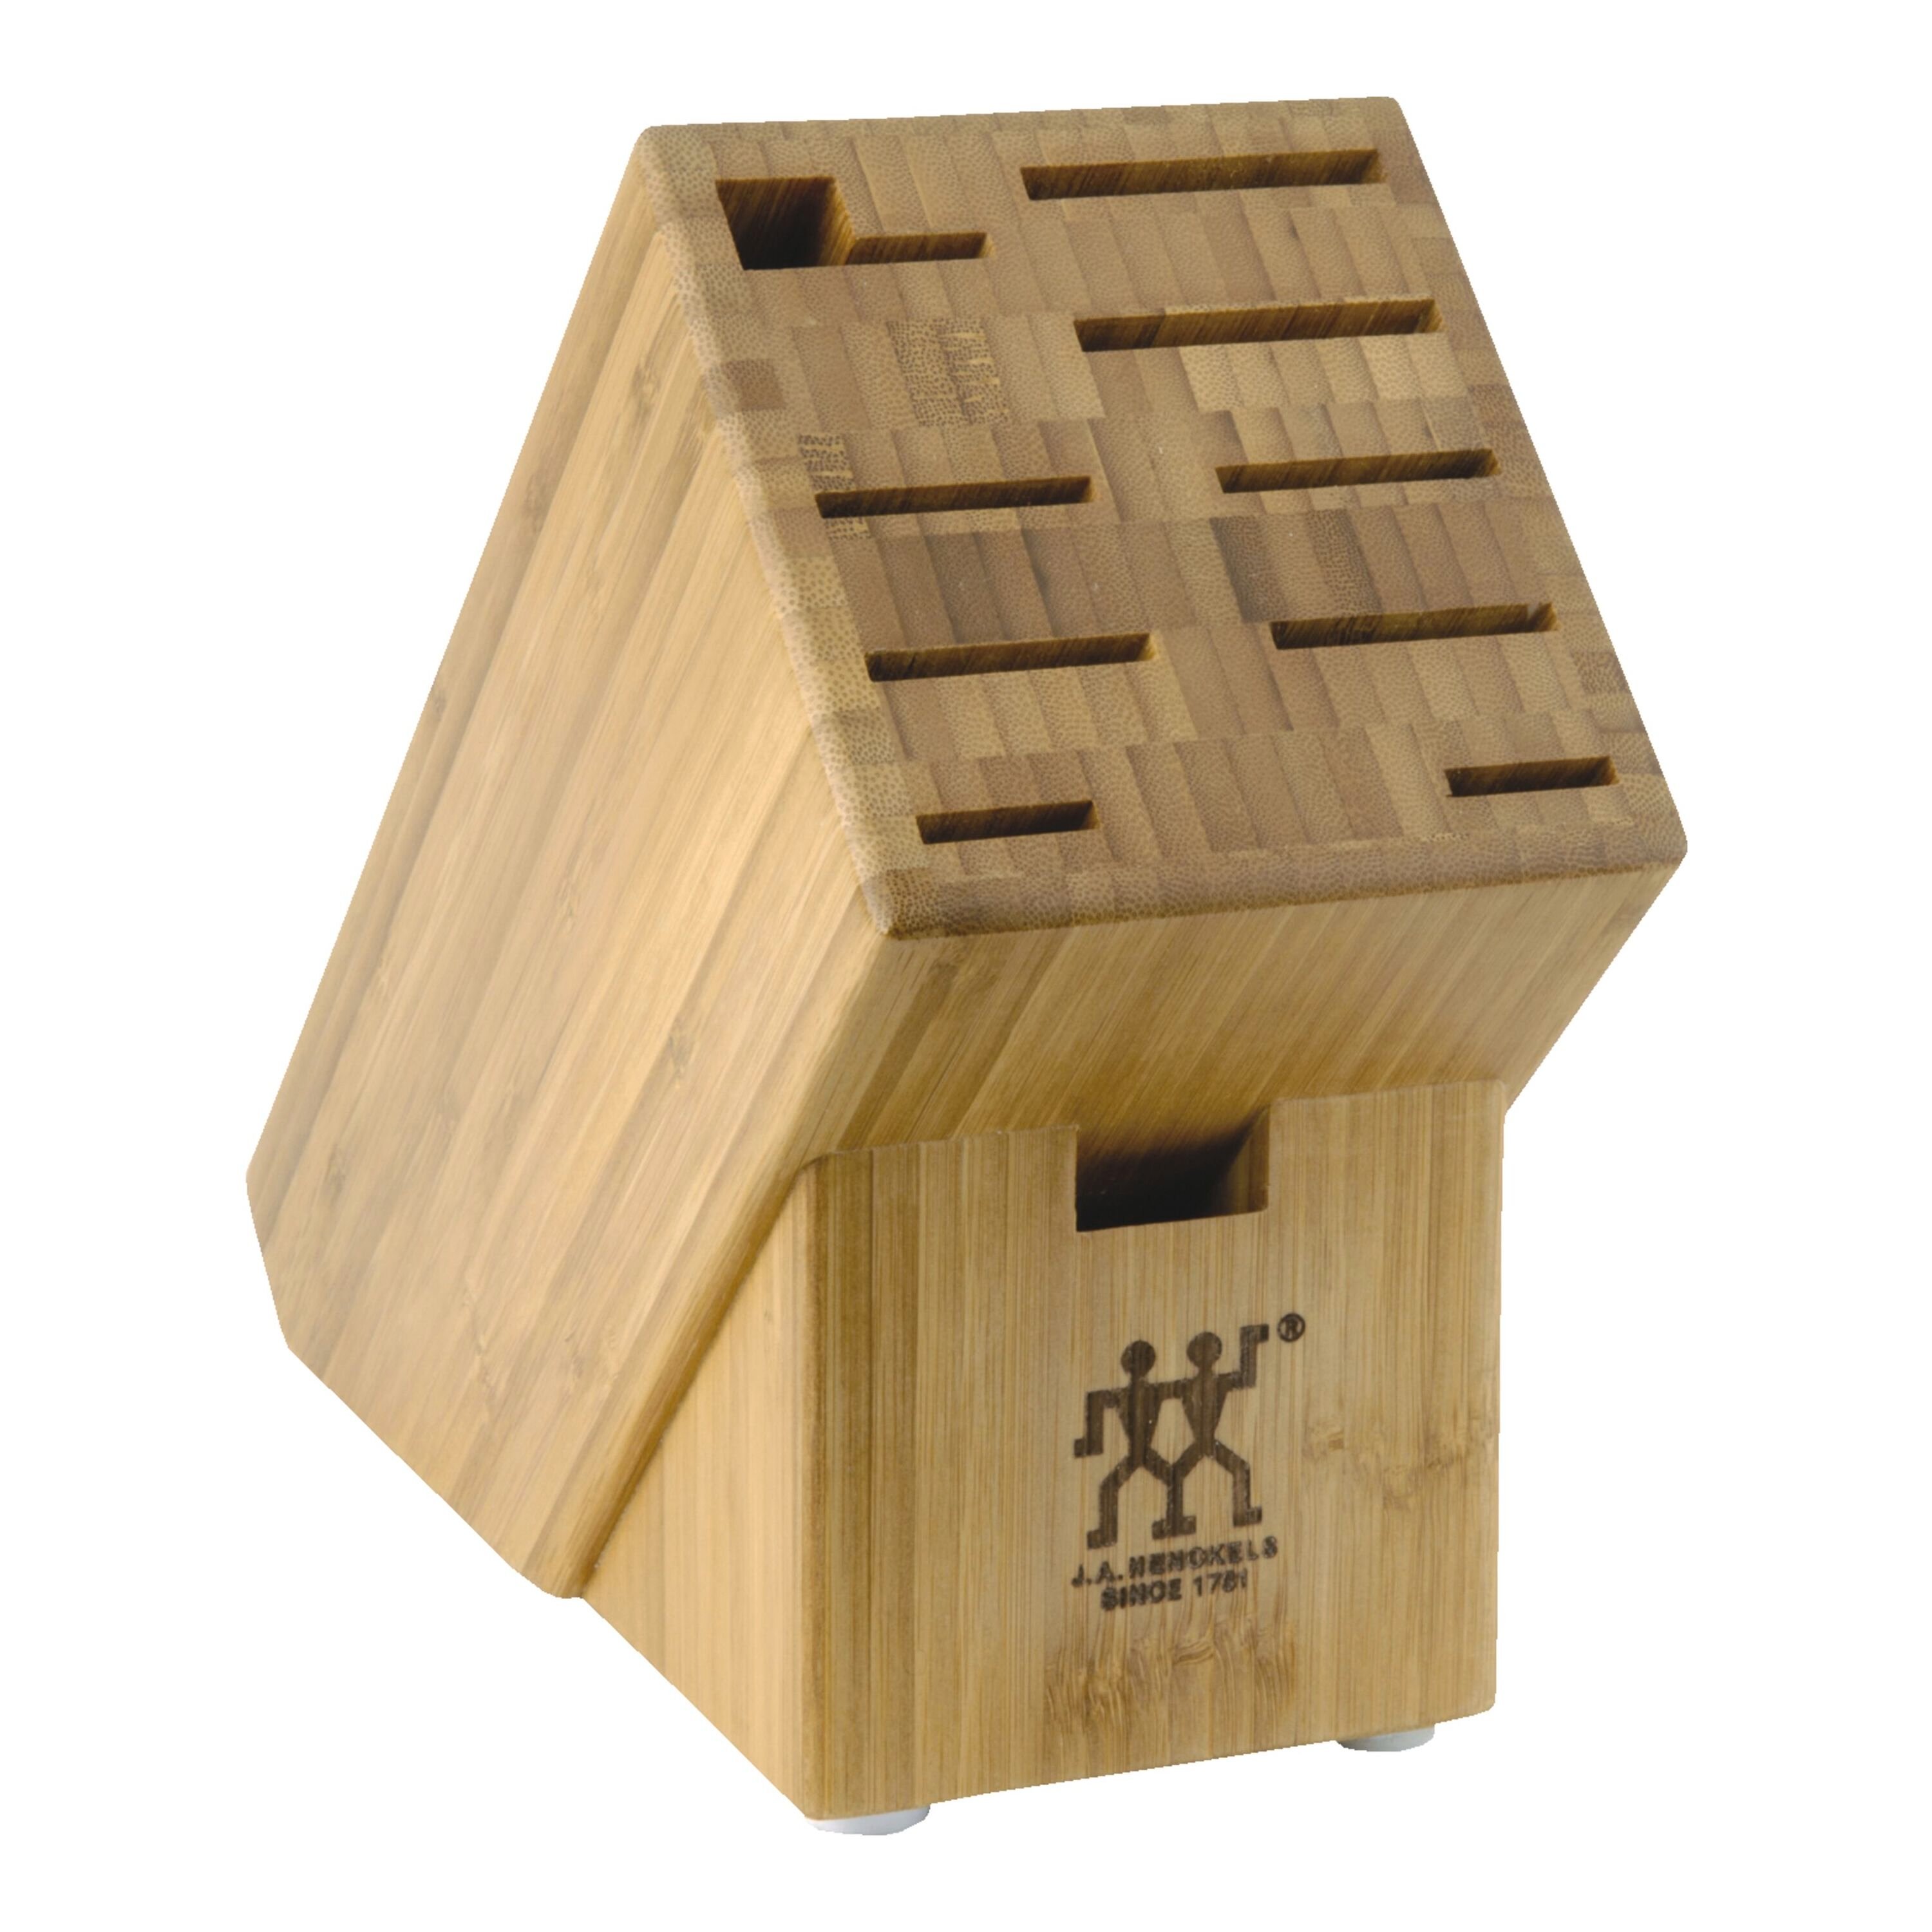 QTY 1- Large Wooden Blocks, Hollow Inside Wood Blocks, Picture